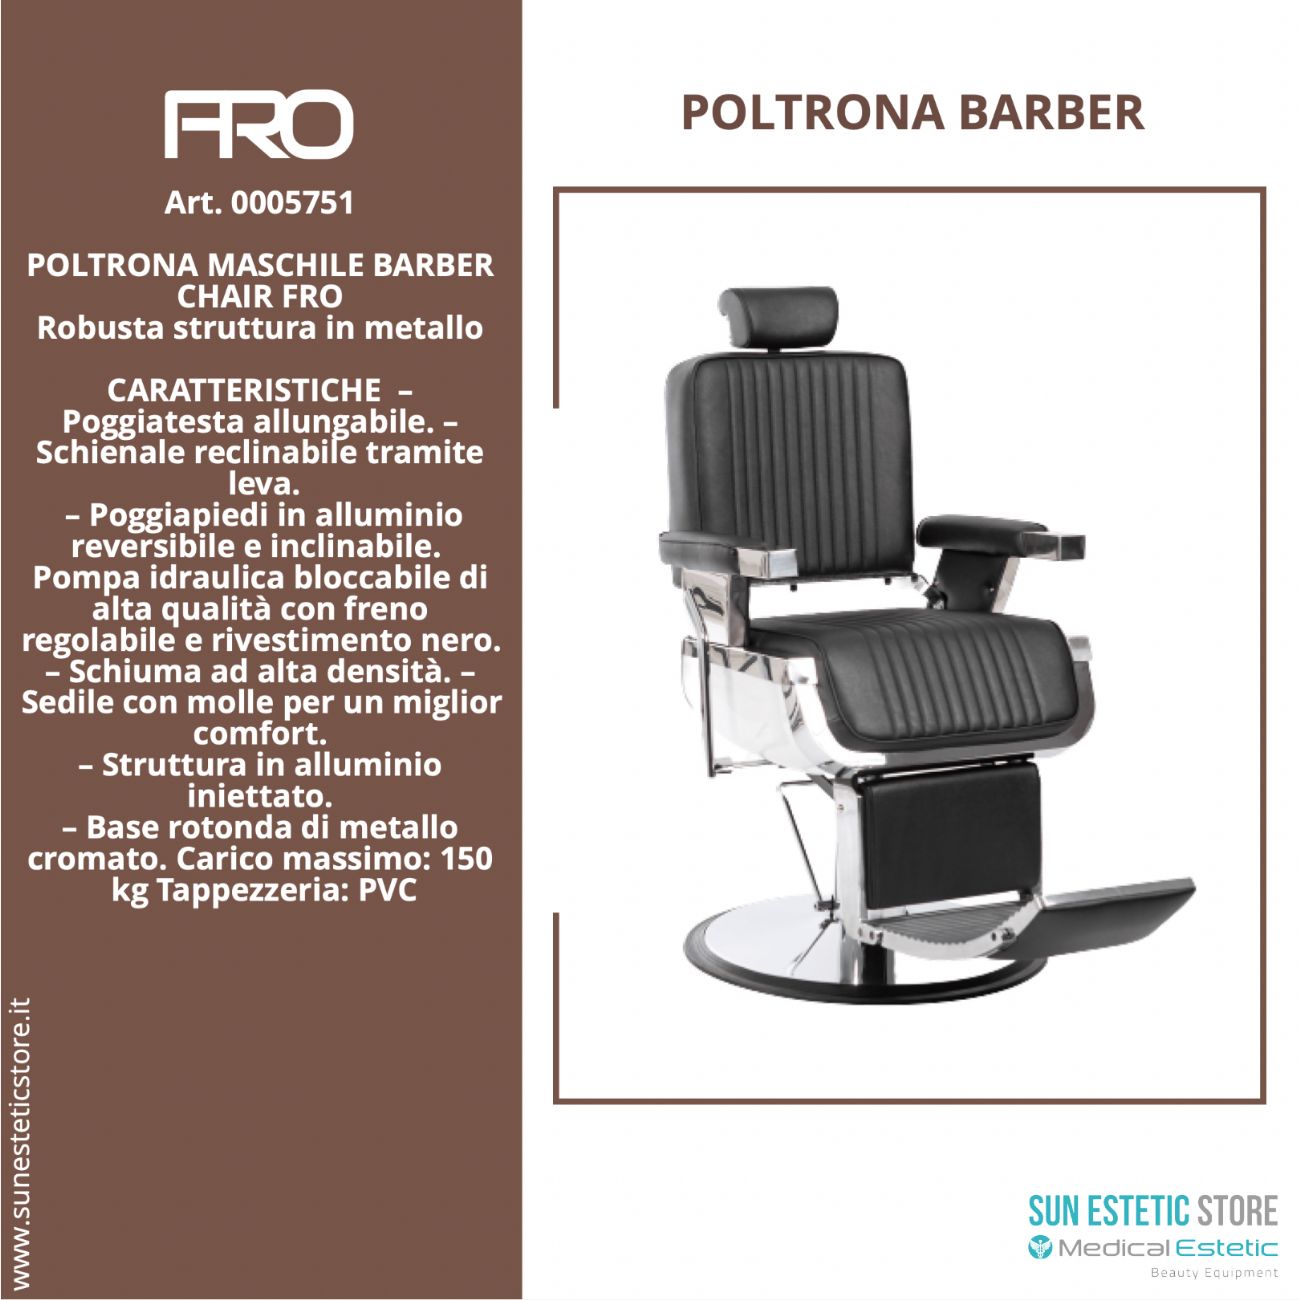 FRO Poltrona Barber